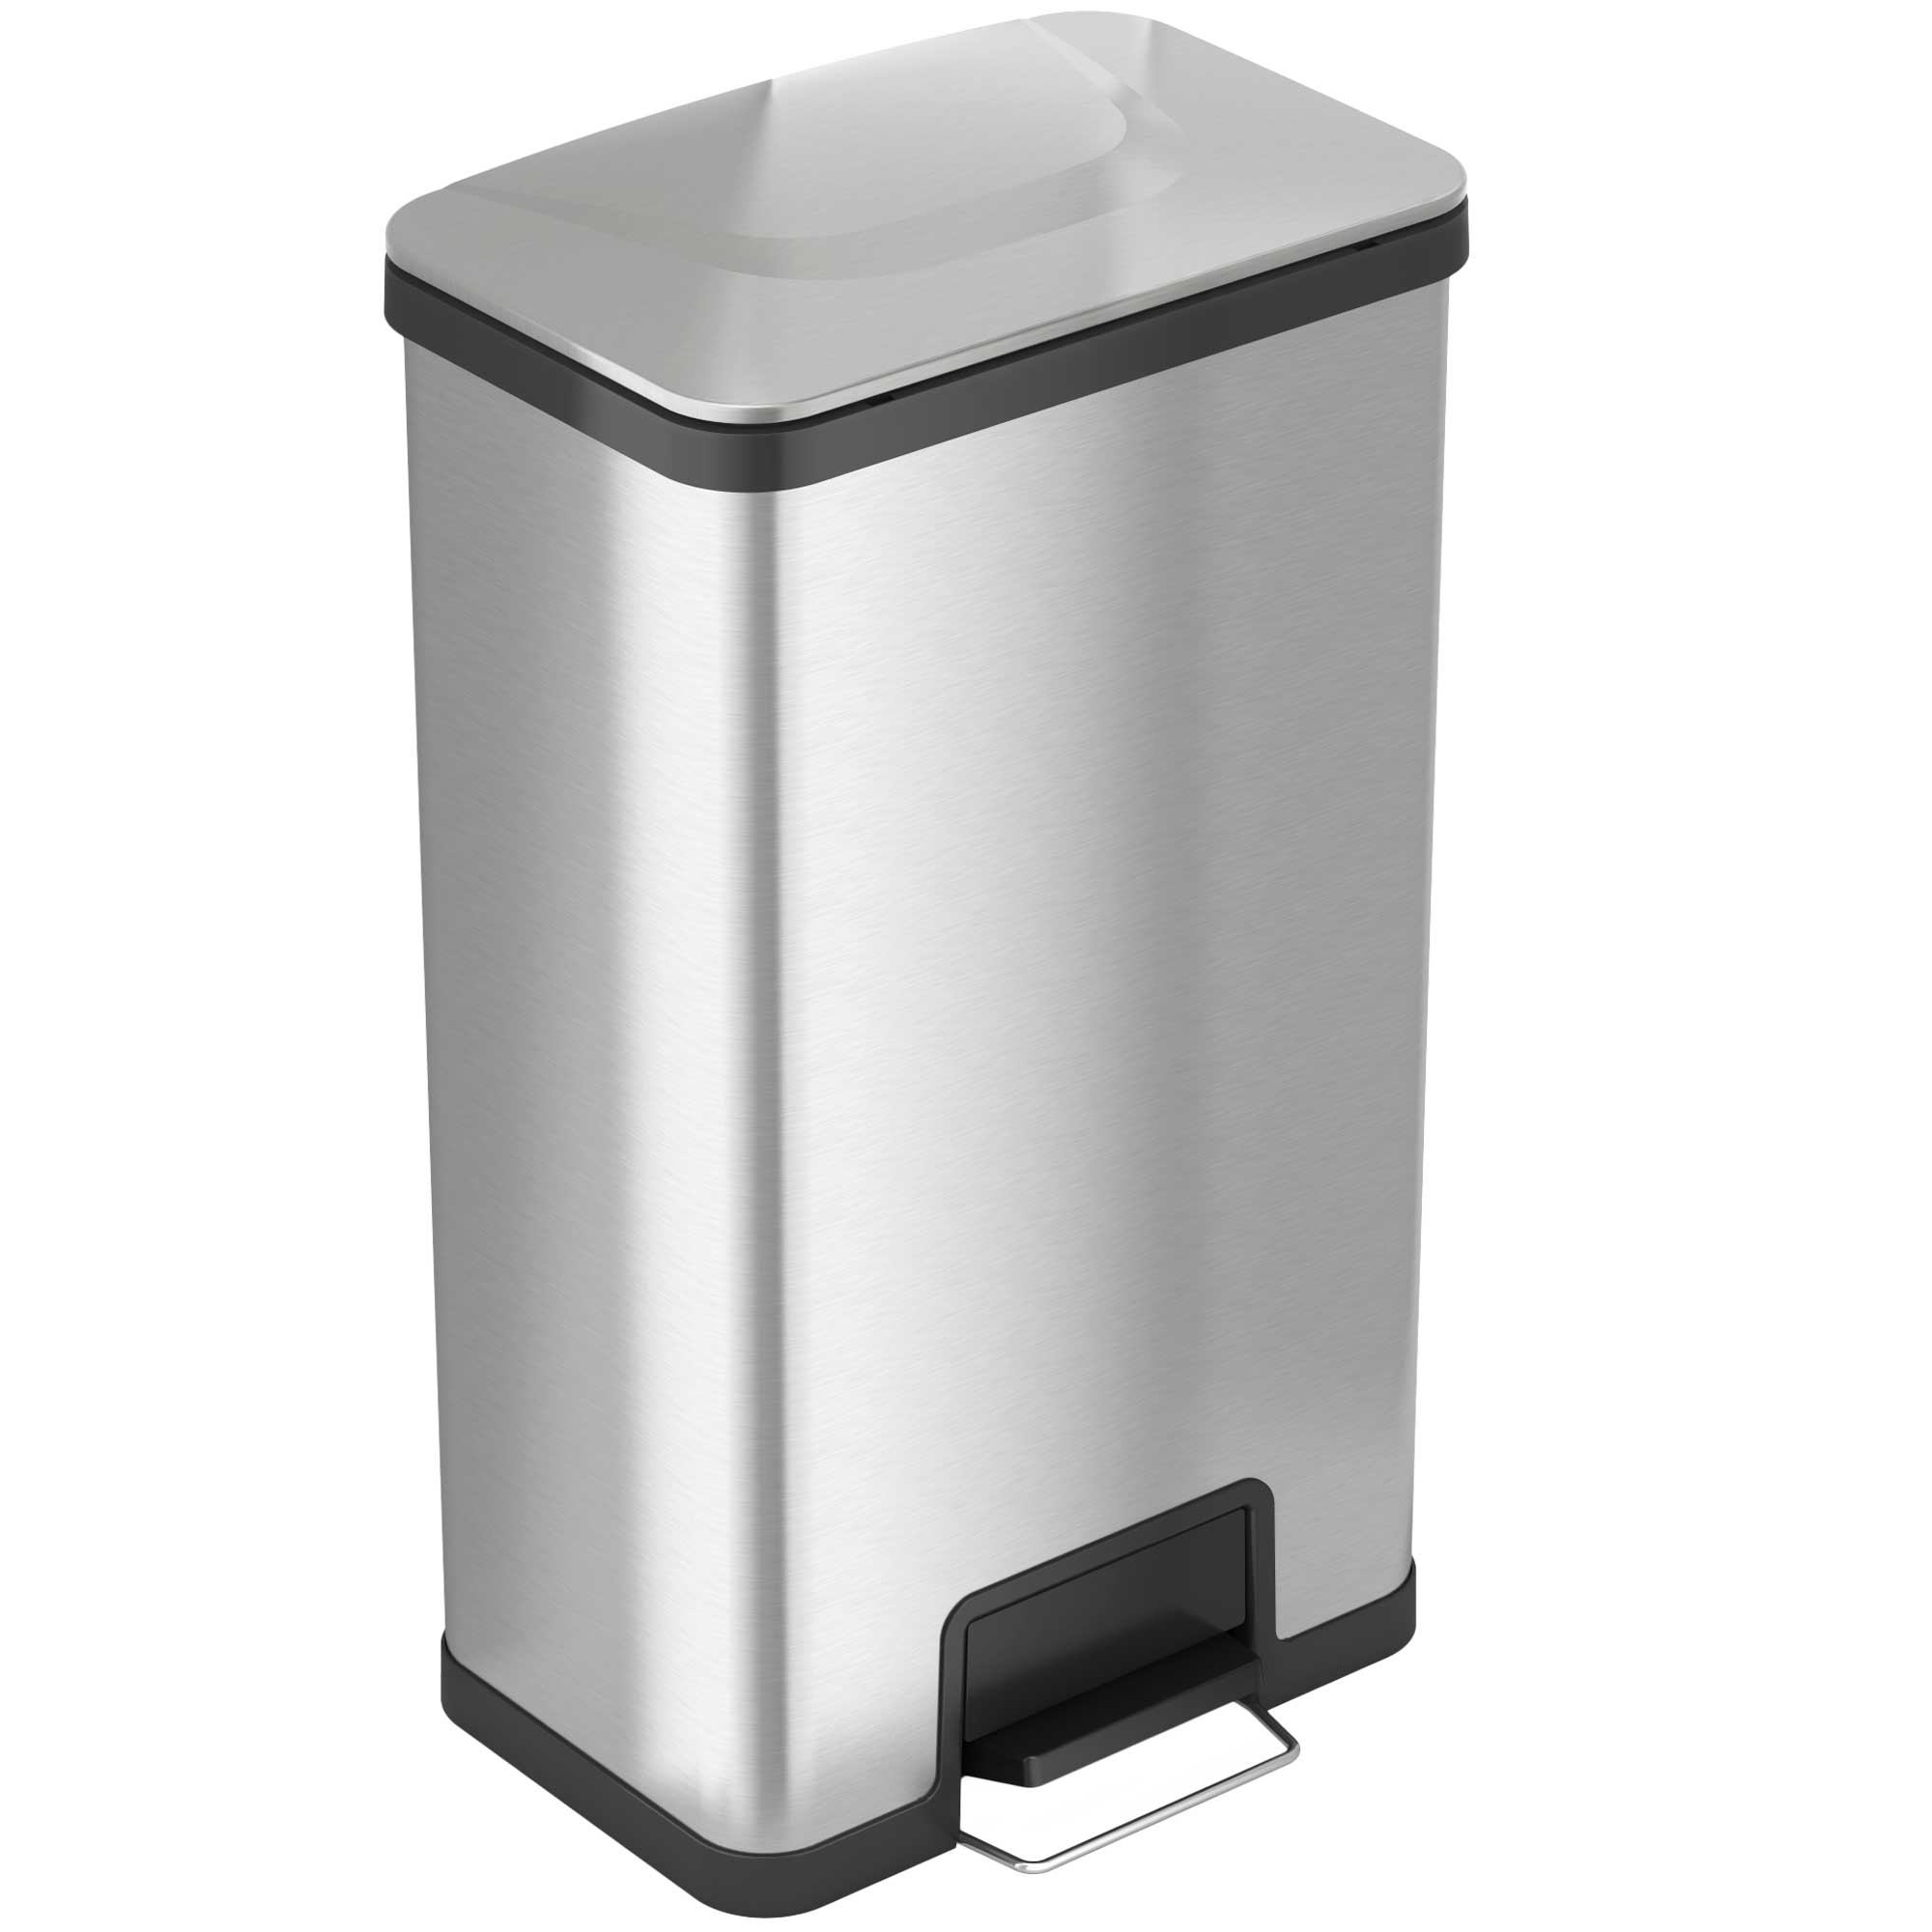 Pedal Dust Bin High Quality, Size: 15,30 & 50 Litre Capacity